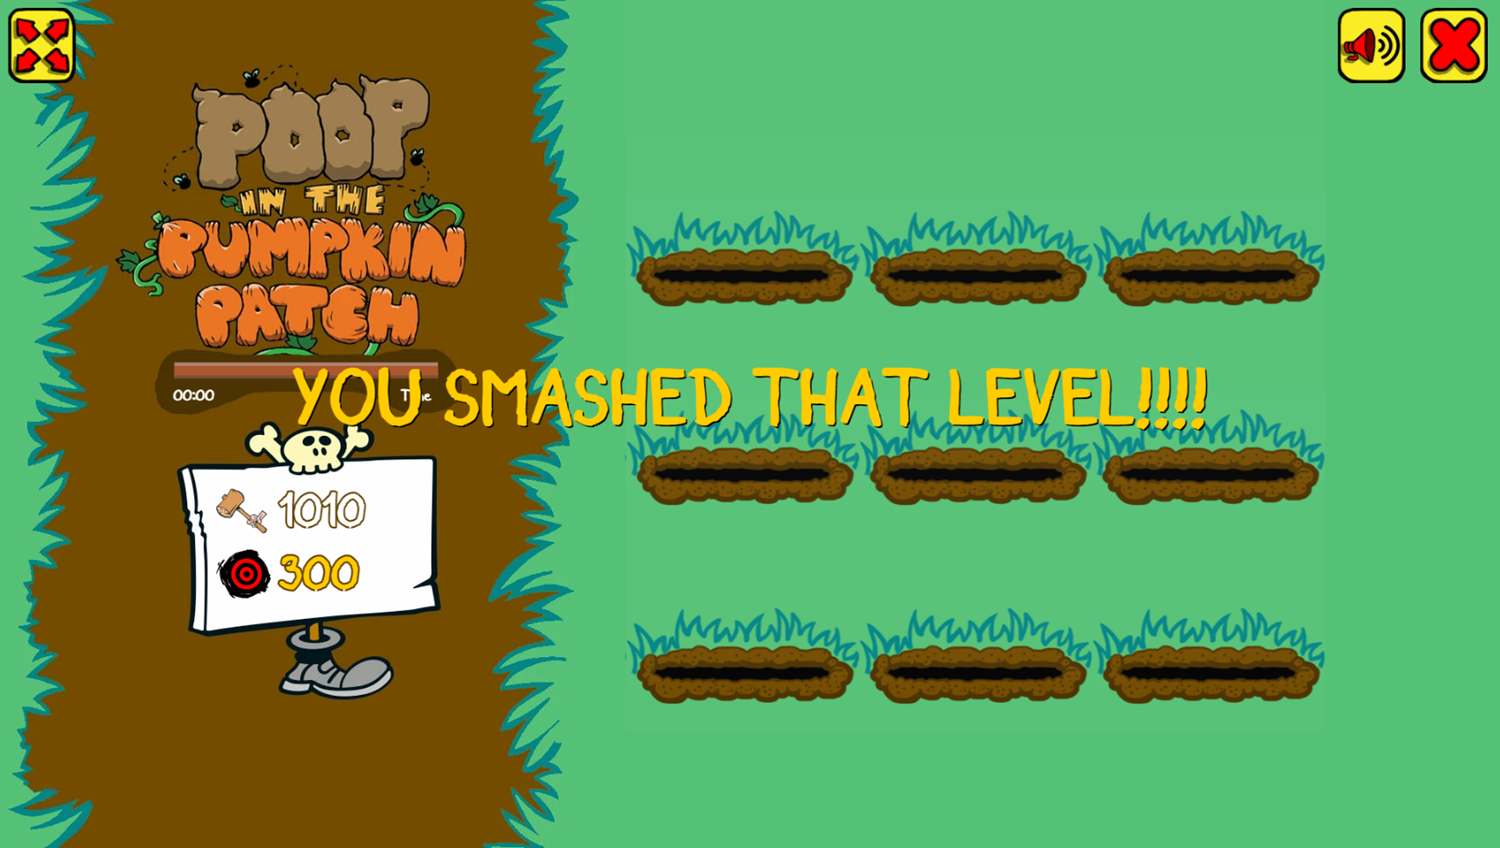 Poop in the Pumpkin Patch Game Level Complete Screenshot.